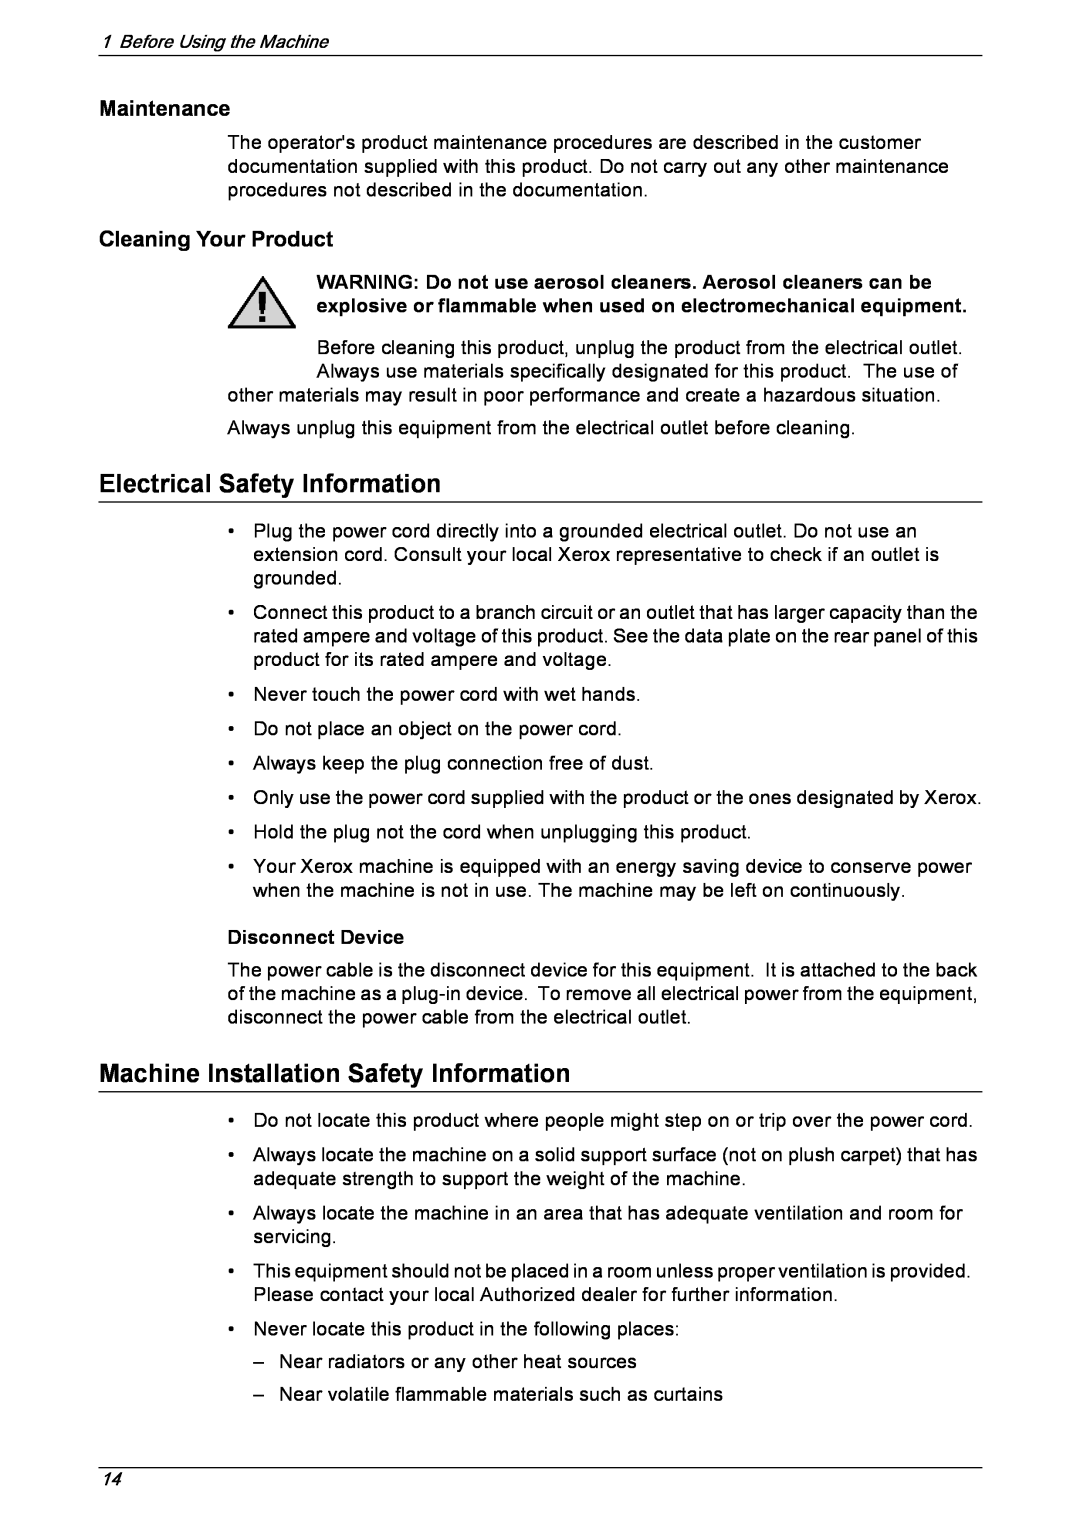 Xerox 5230 Electrical Safety Information, Machine Installation Safety Information, Maintenance, Cleaning Your Product 